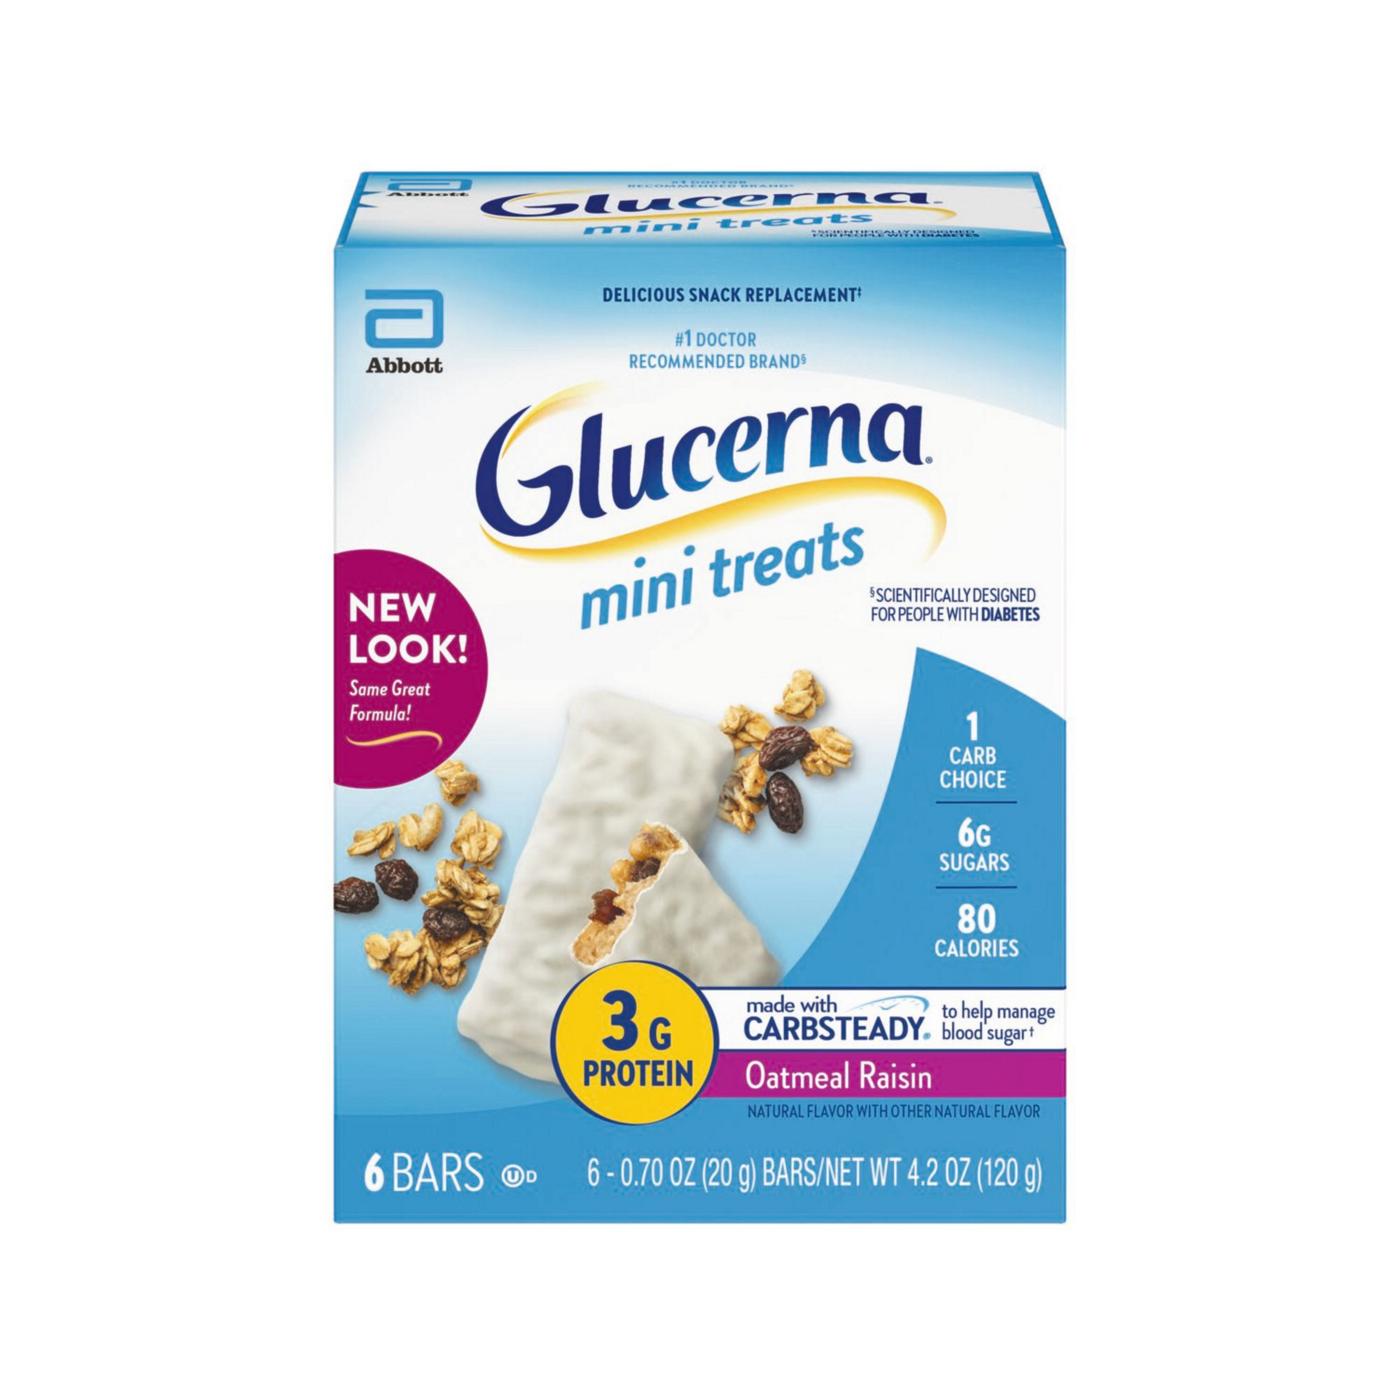 Glucerna Mini Treats, Diabetic Snack Replacement to Support Blood Sugar Management, Oatmeal Raisin; image 3 of 9